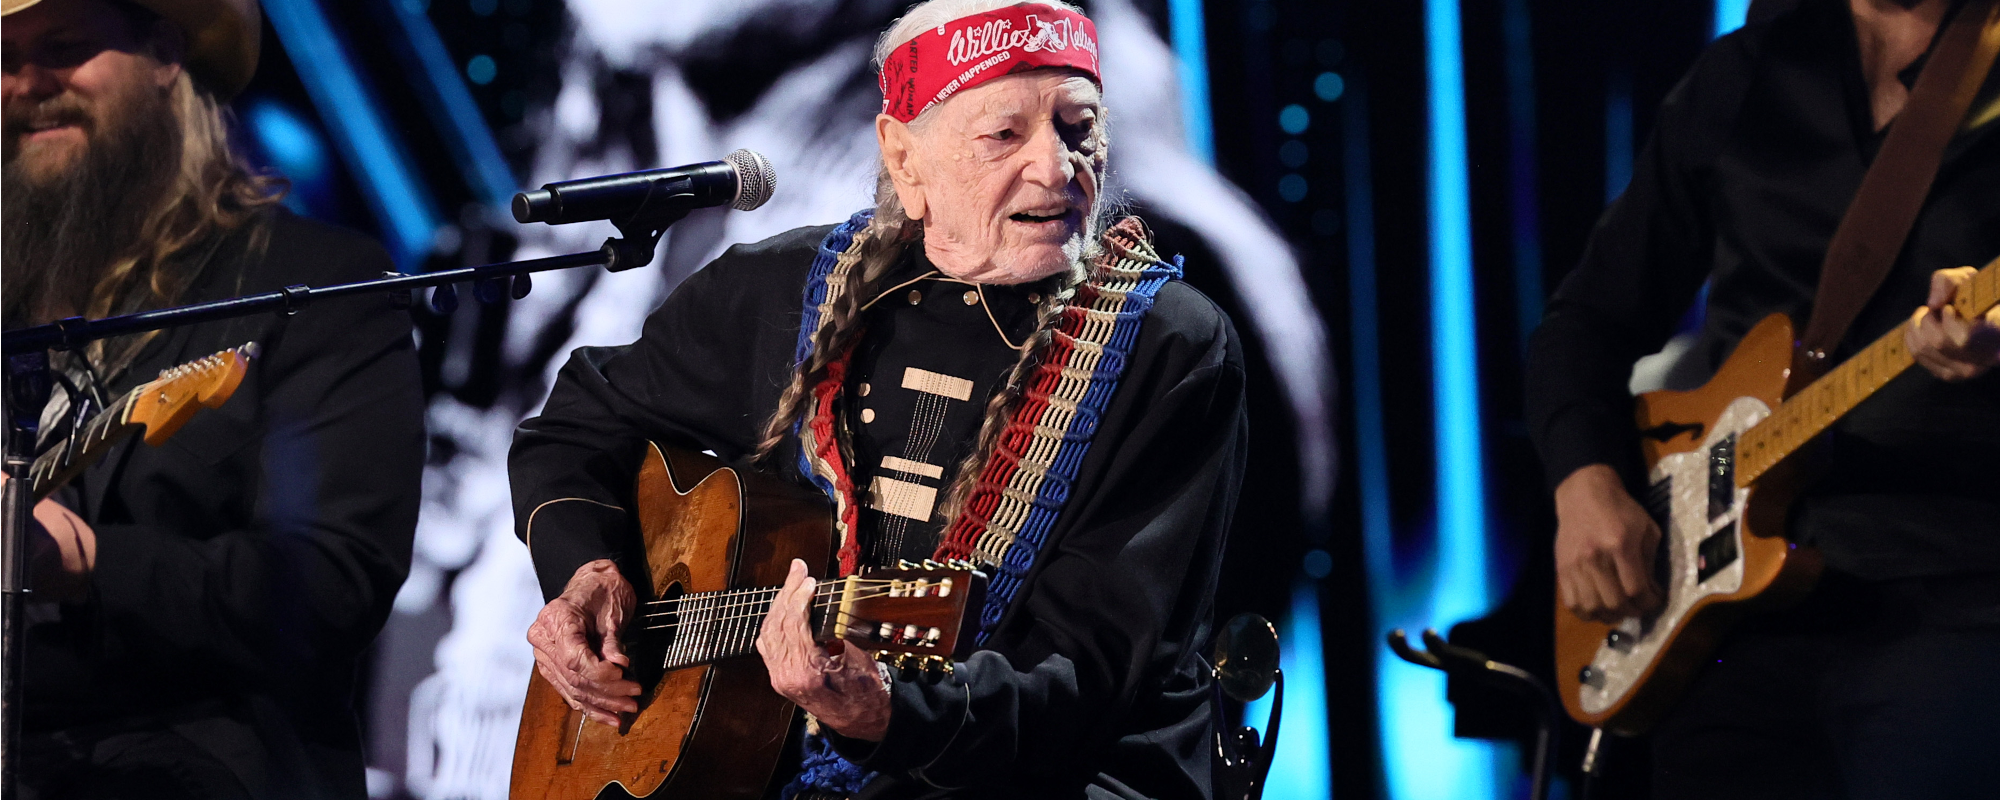 Keith Richards’ Unbelievable Performance With Willie Nelson Is Blowing Fans’ Minds: “Doesn’t Get Any Better”